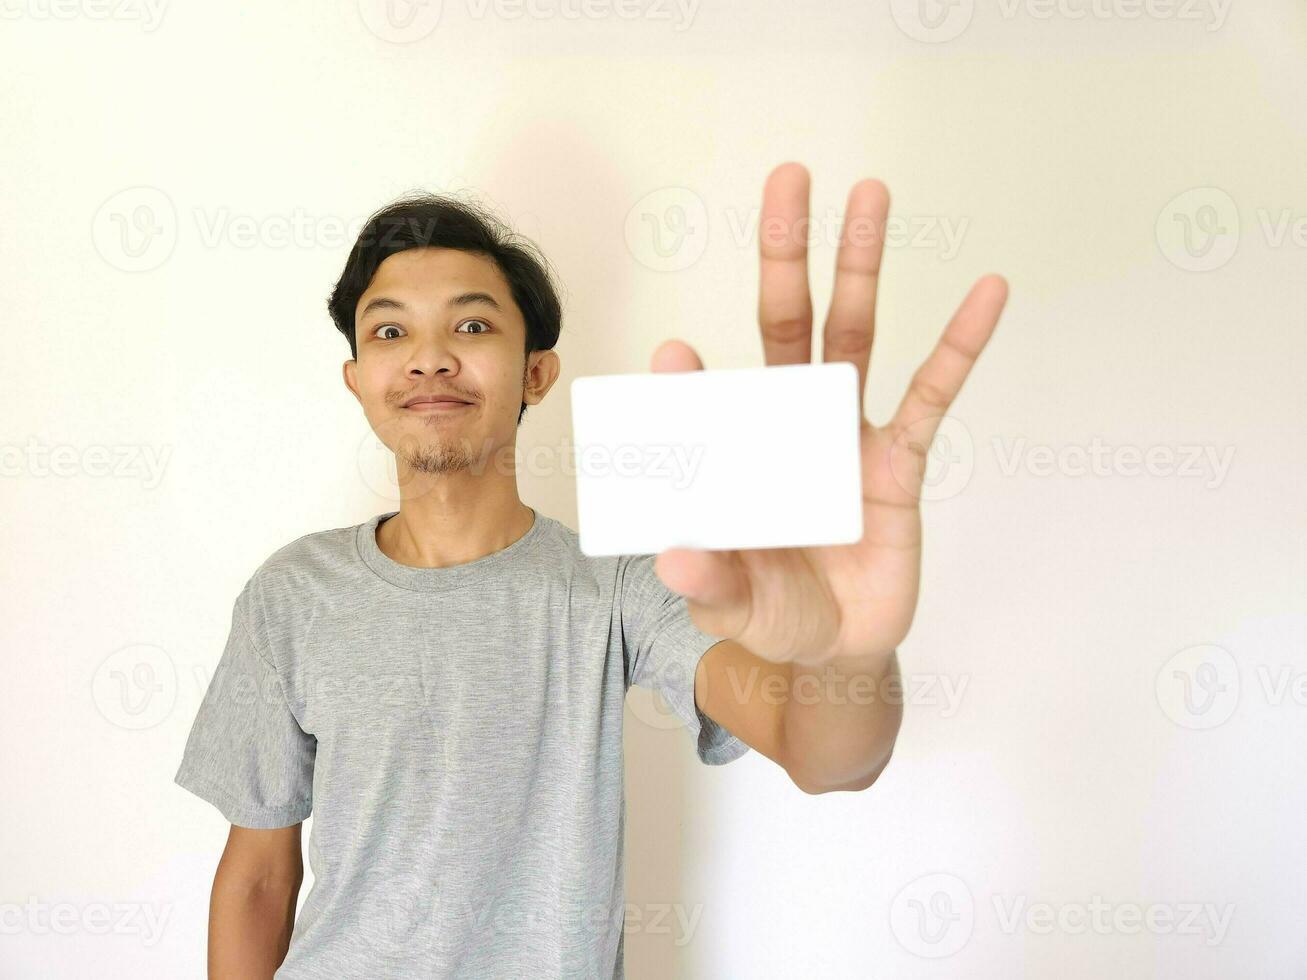 man showing close up empty card to focus on the card. photo